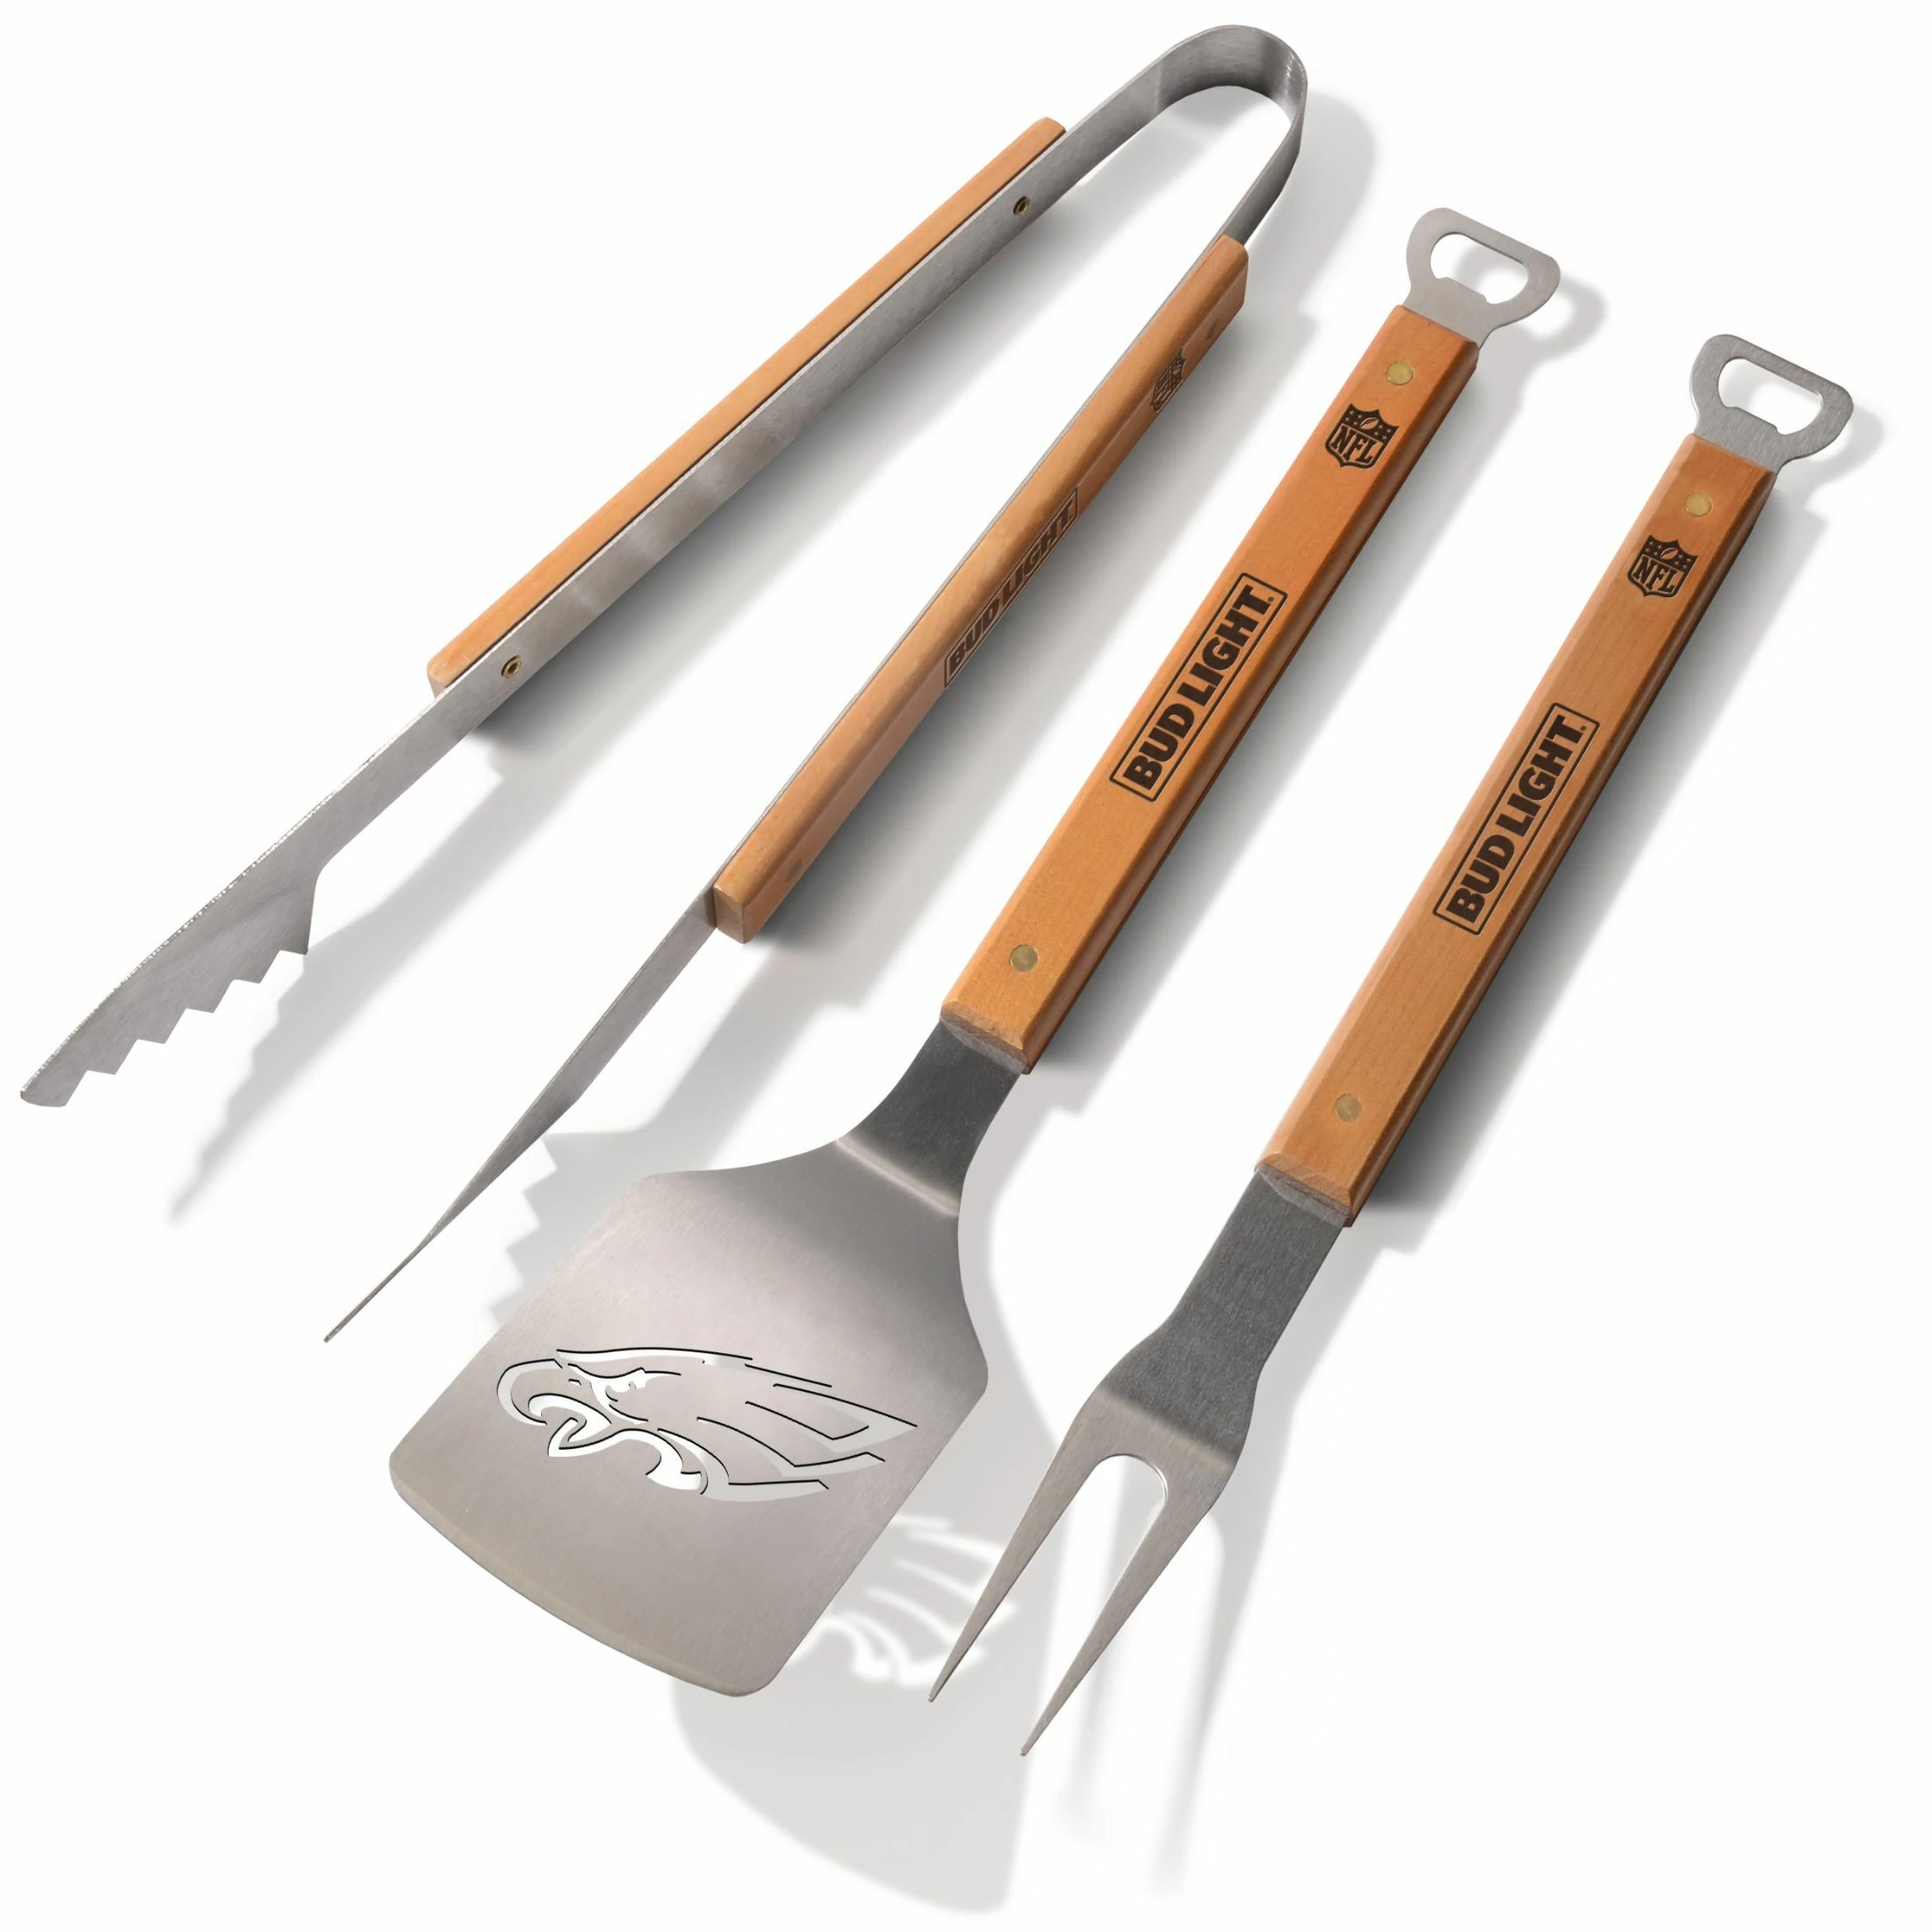 

Co-Branded Phi Eagles 3-Piece BBQ Grill Set